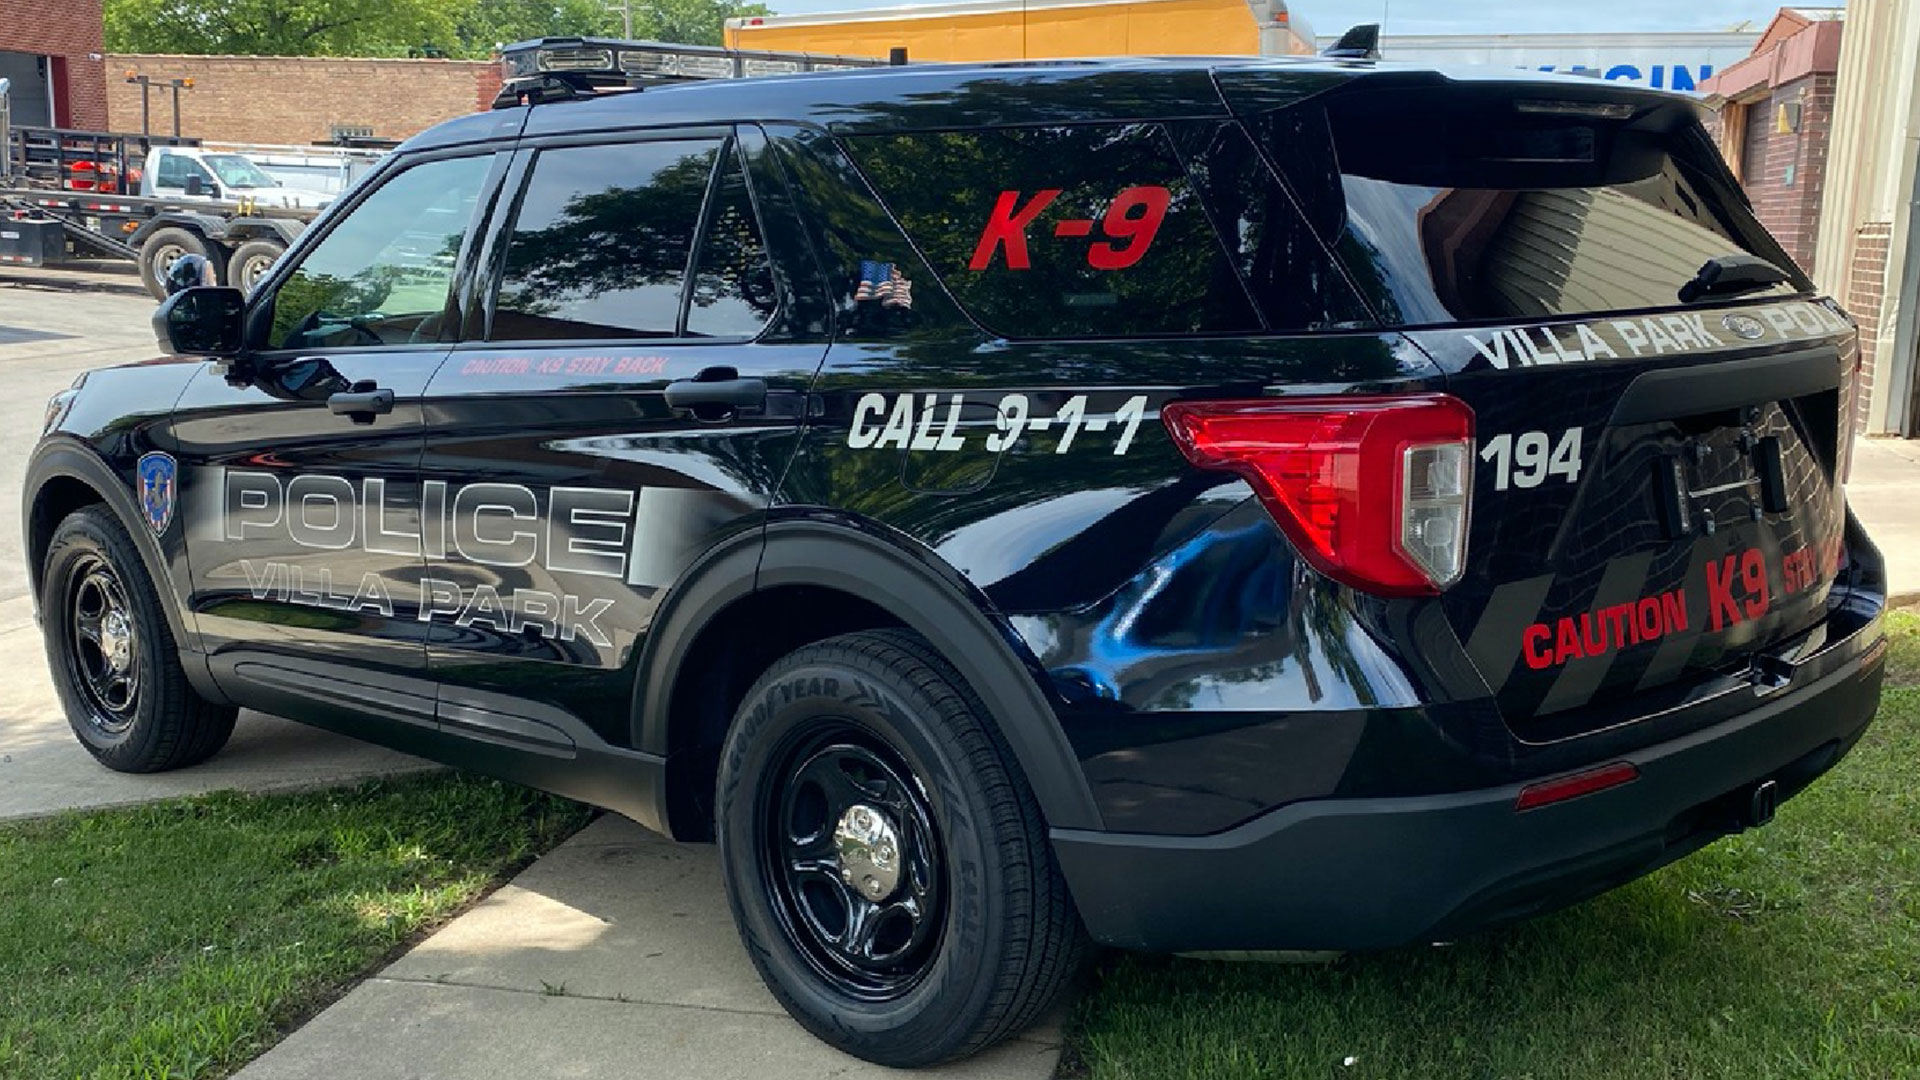 Police Car Graphic Kits, Featuring the “Big and Bold” Design